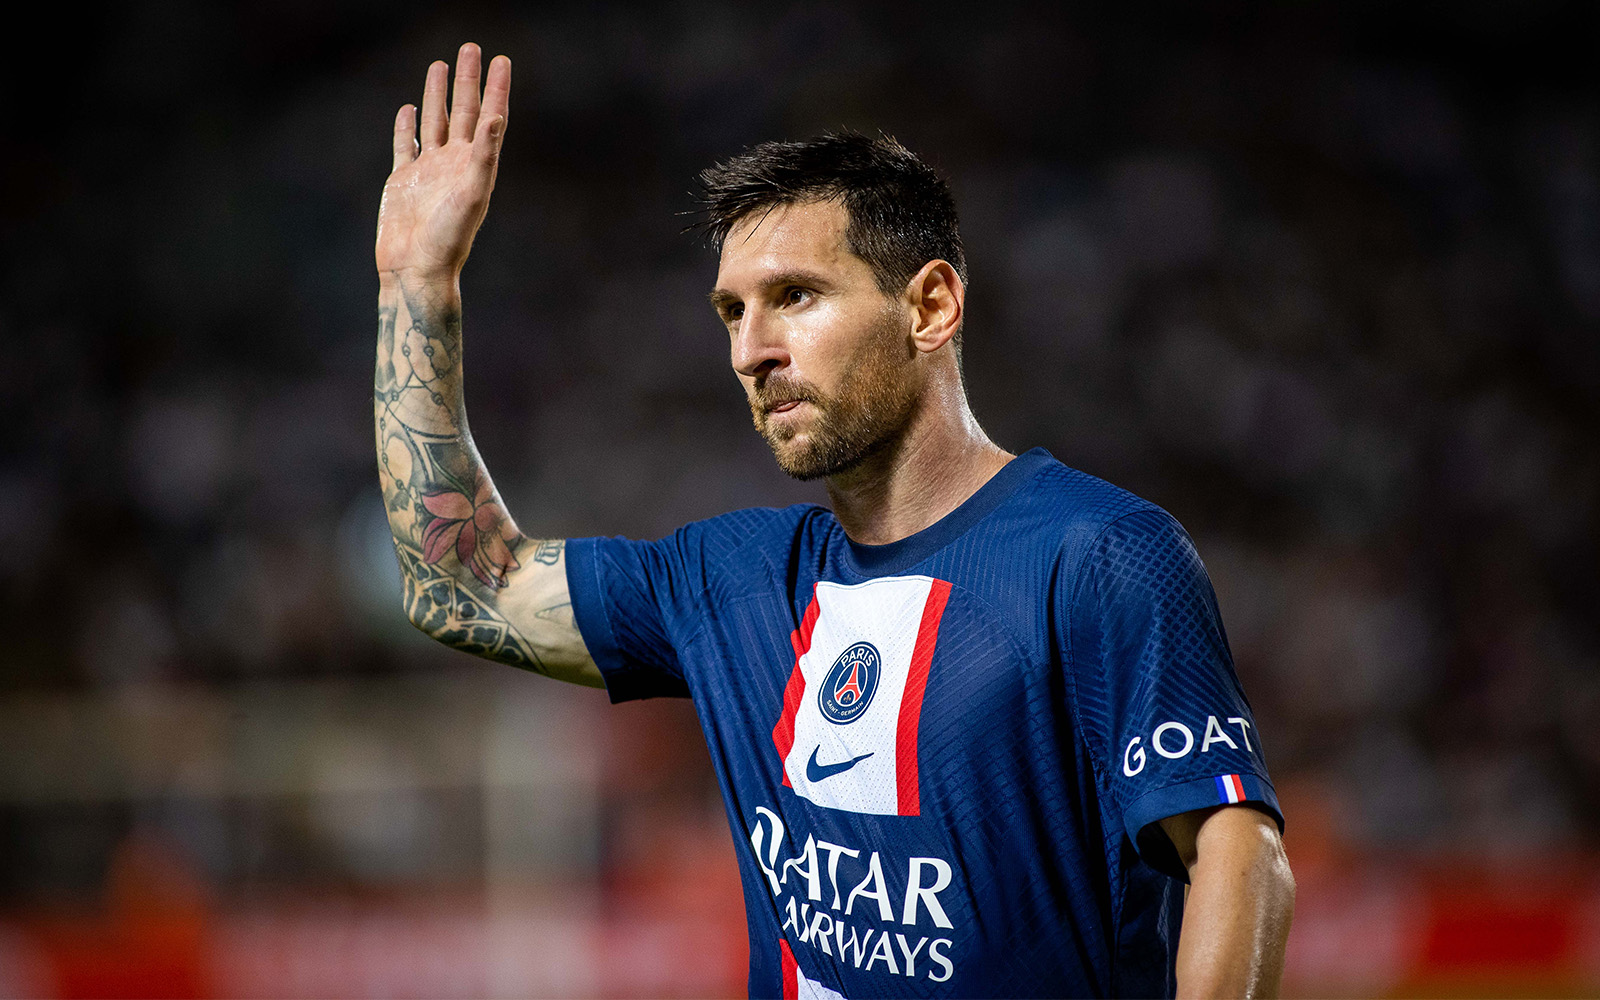 Ballon d'Or: Shocker from French Football! Lionel Messi misses 30-man shortlist for the first time since 2005, Neymar also omitted as Karim Benzema favourite for 2022 award - Check out